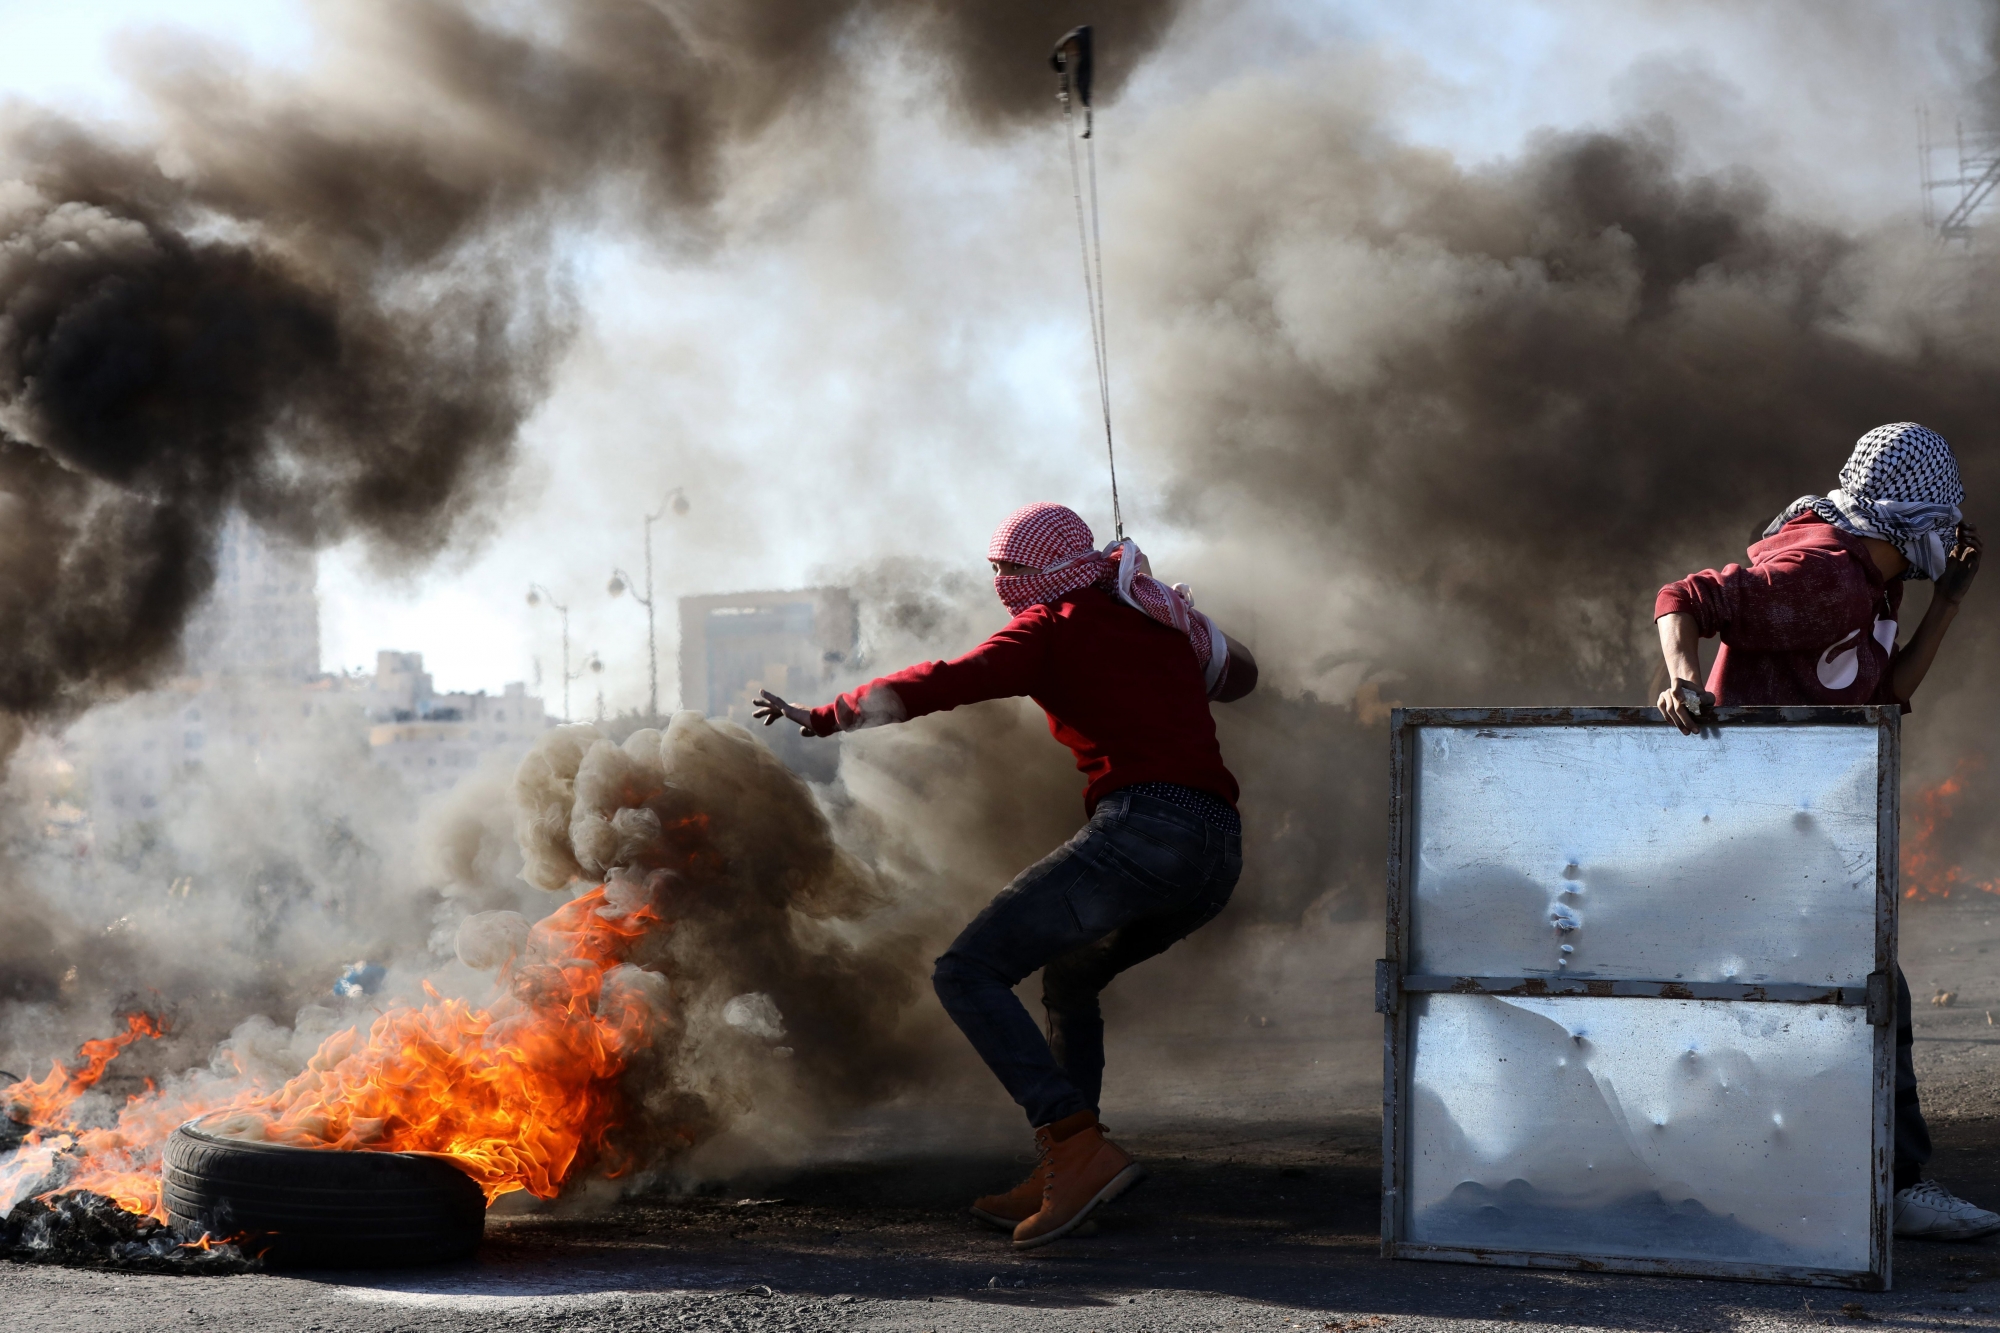 epa06377108 Palestinian protestors hurl stones at Israeli troops during clashes in the West Bank City of Ramallah, 08 December 2017. Palestinians announced general strike and a rage day to protest against US President Donald J. Trump declaration recognizing Jerusalem as the capital of the Israel.  EPA/ALAA BADARNEH MIDEAST PALESTINIAN ISRAEL CONFLICT